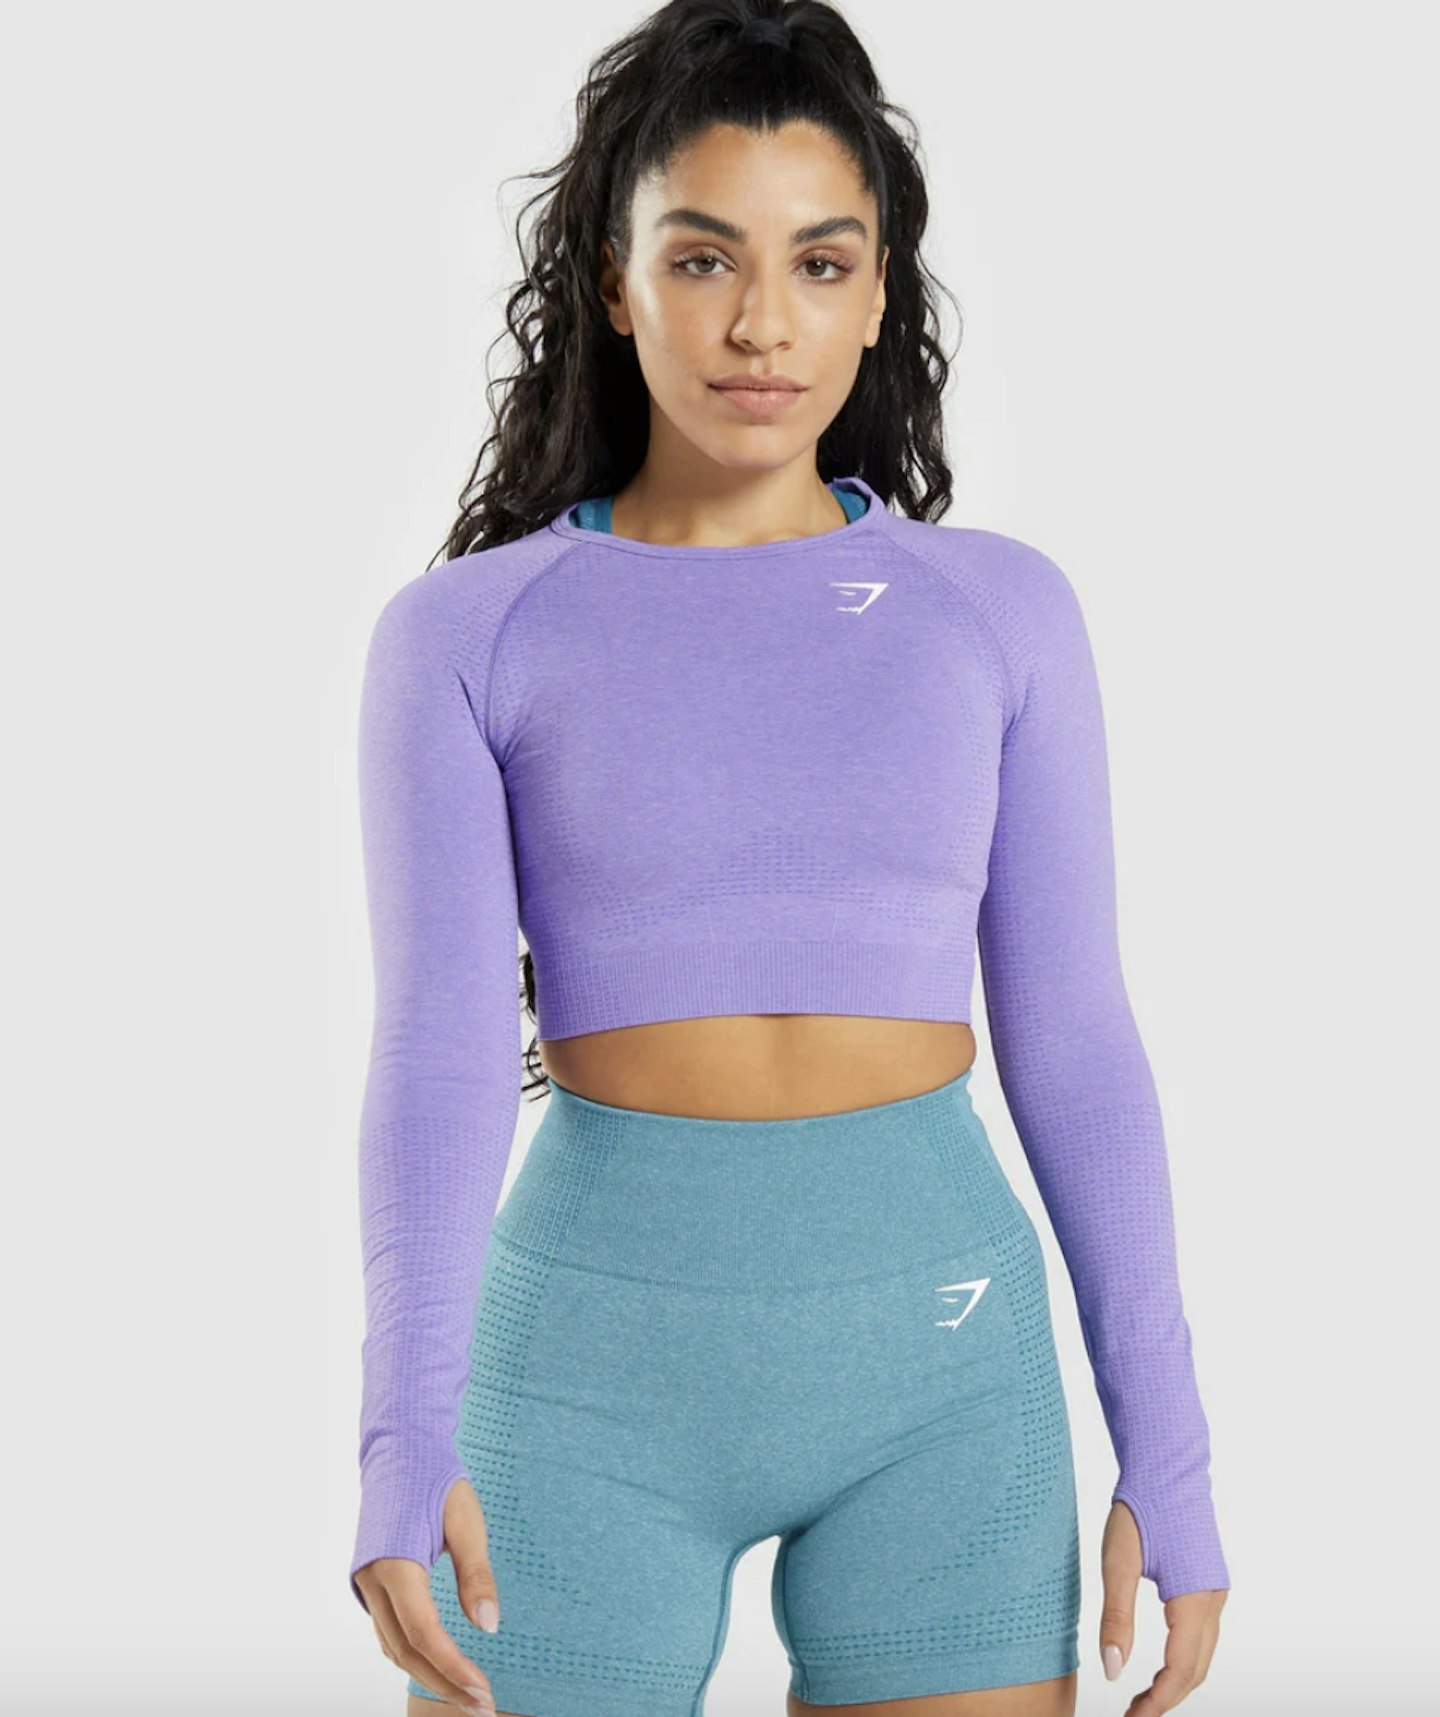 Gymshark Black Friday Sale 2022: Here's What To Buy | Fashion | Grazia